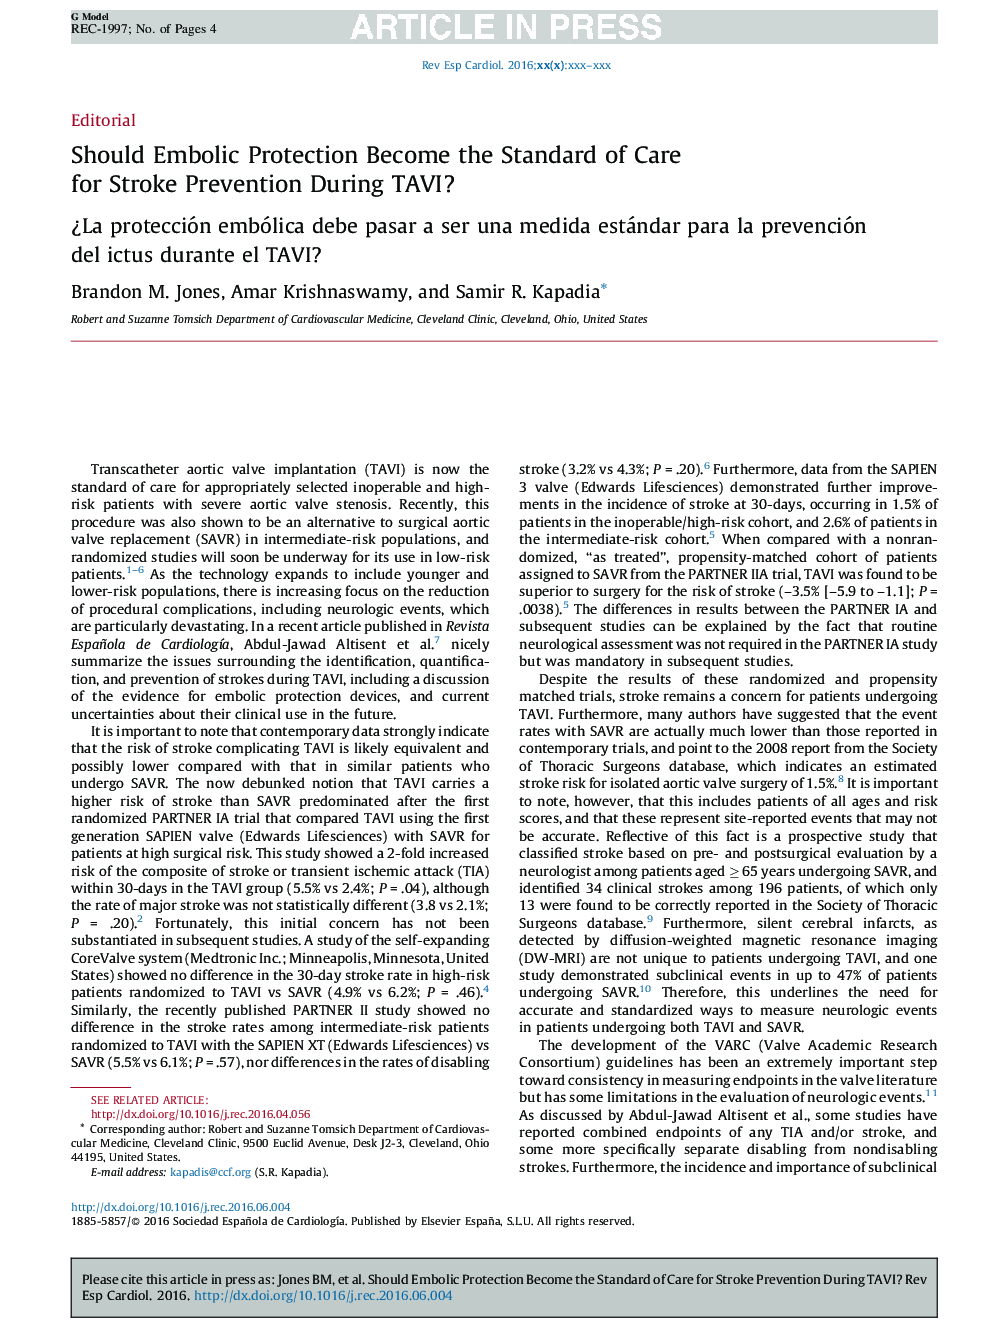 Should Embolic Protection Become the Standard of Care for Stroke Prevention During TAVI?